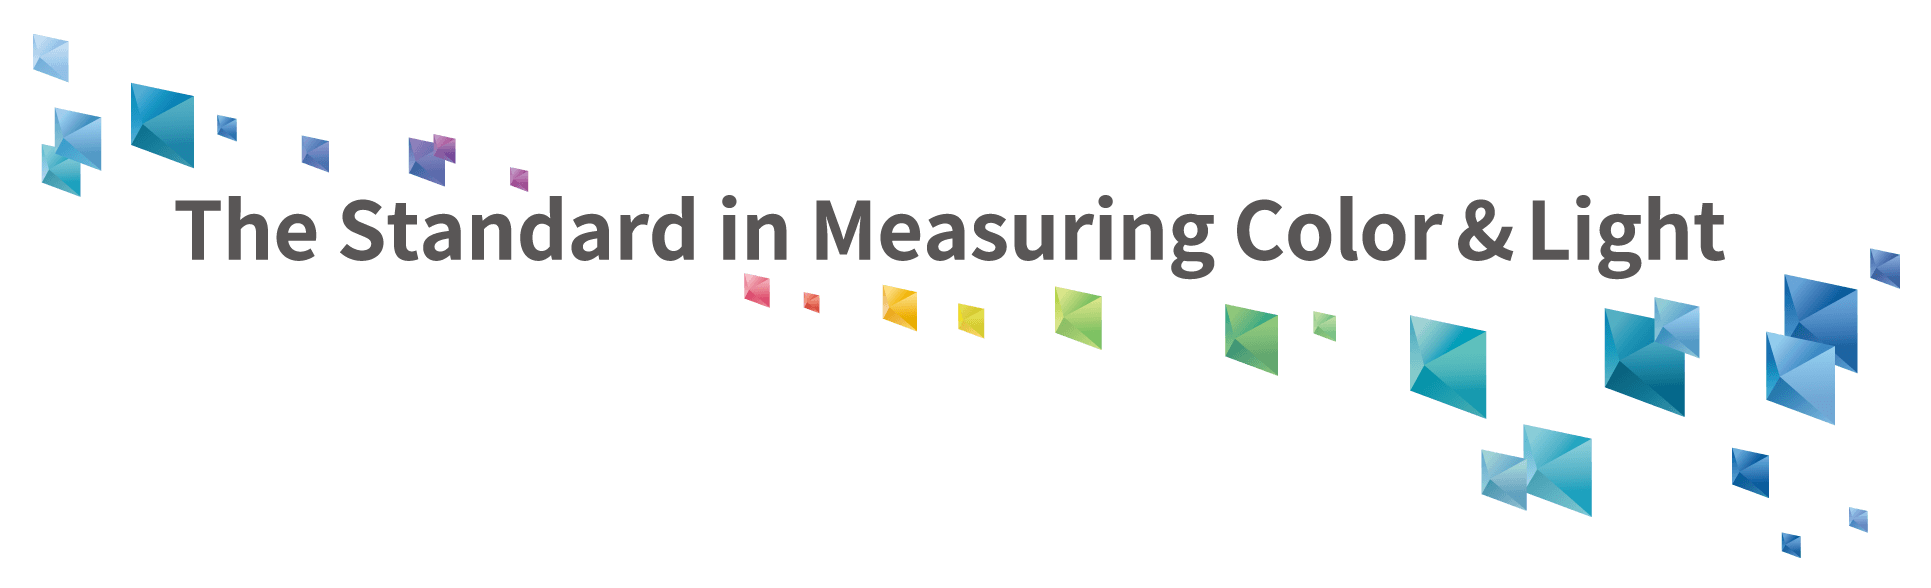 The Standard in Measuring Color & Light